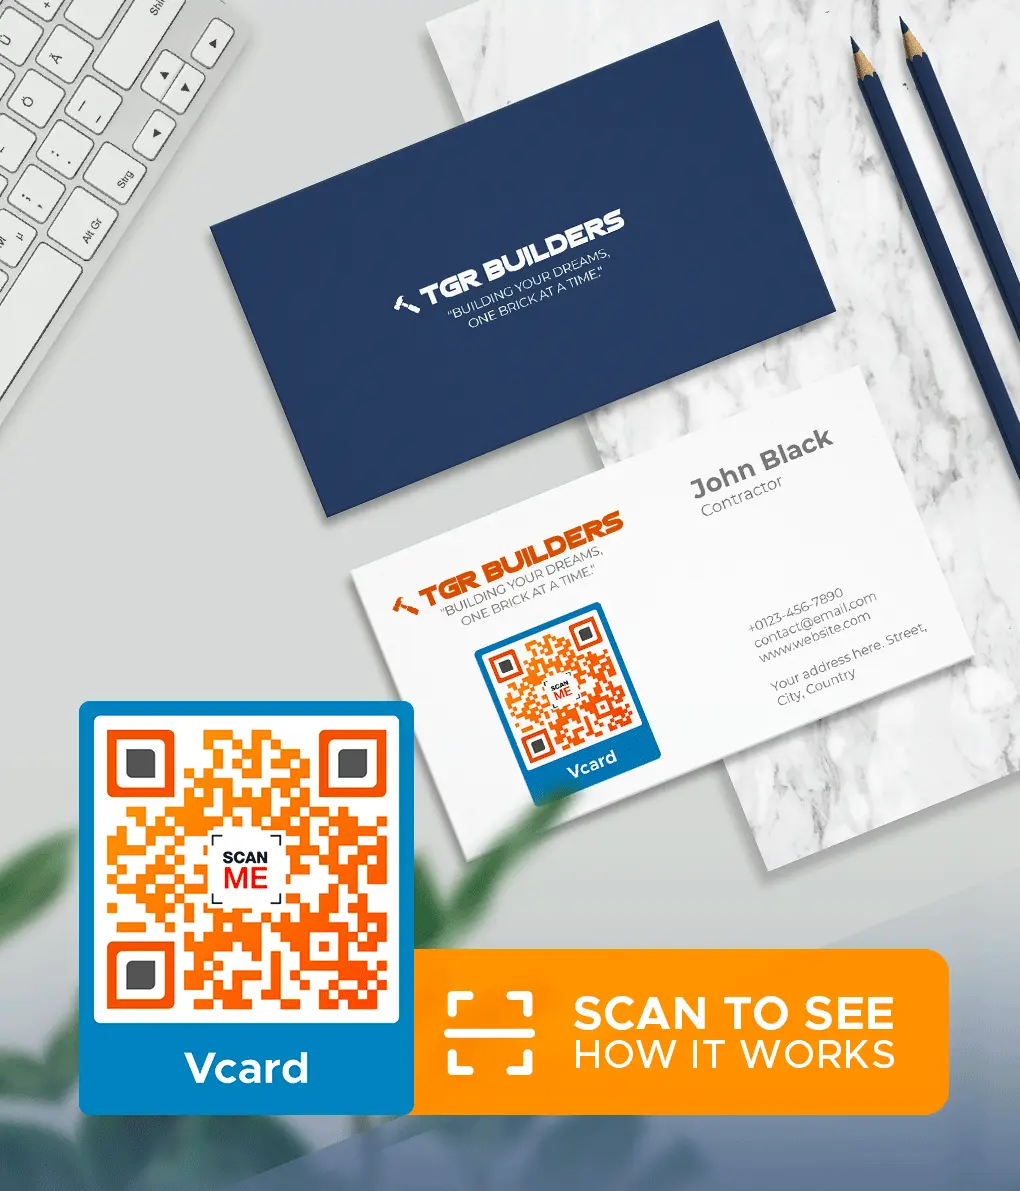 Digital business card with a QR code